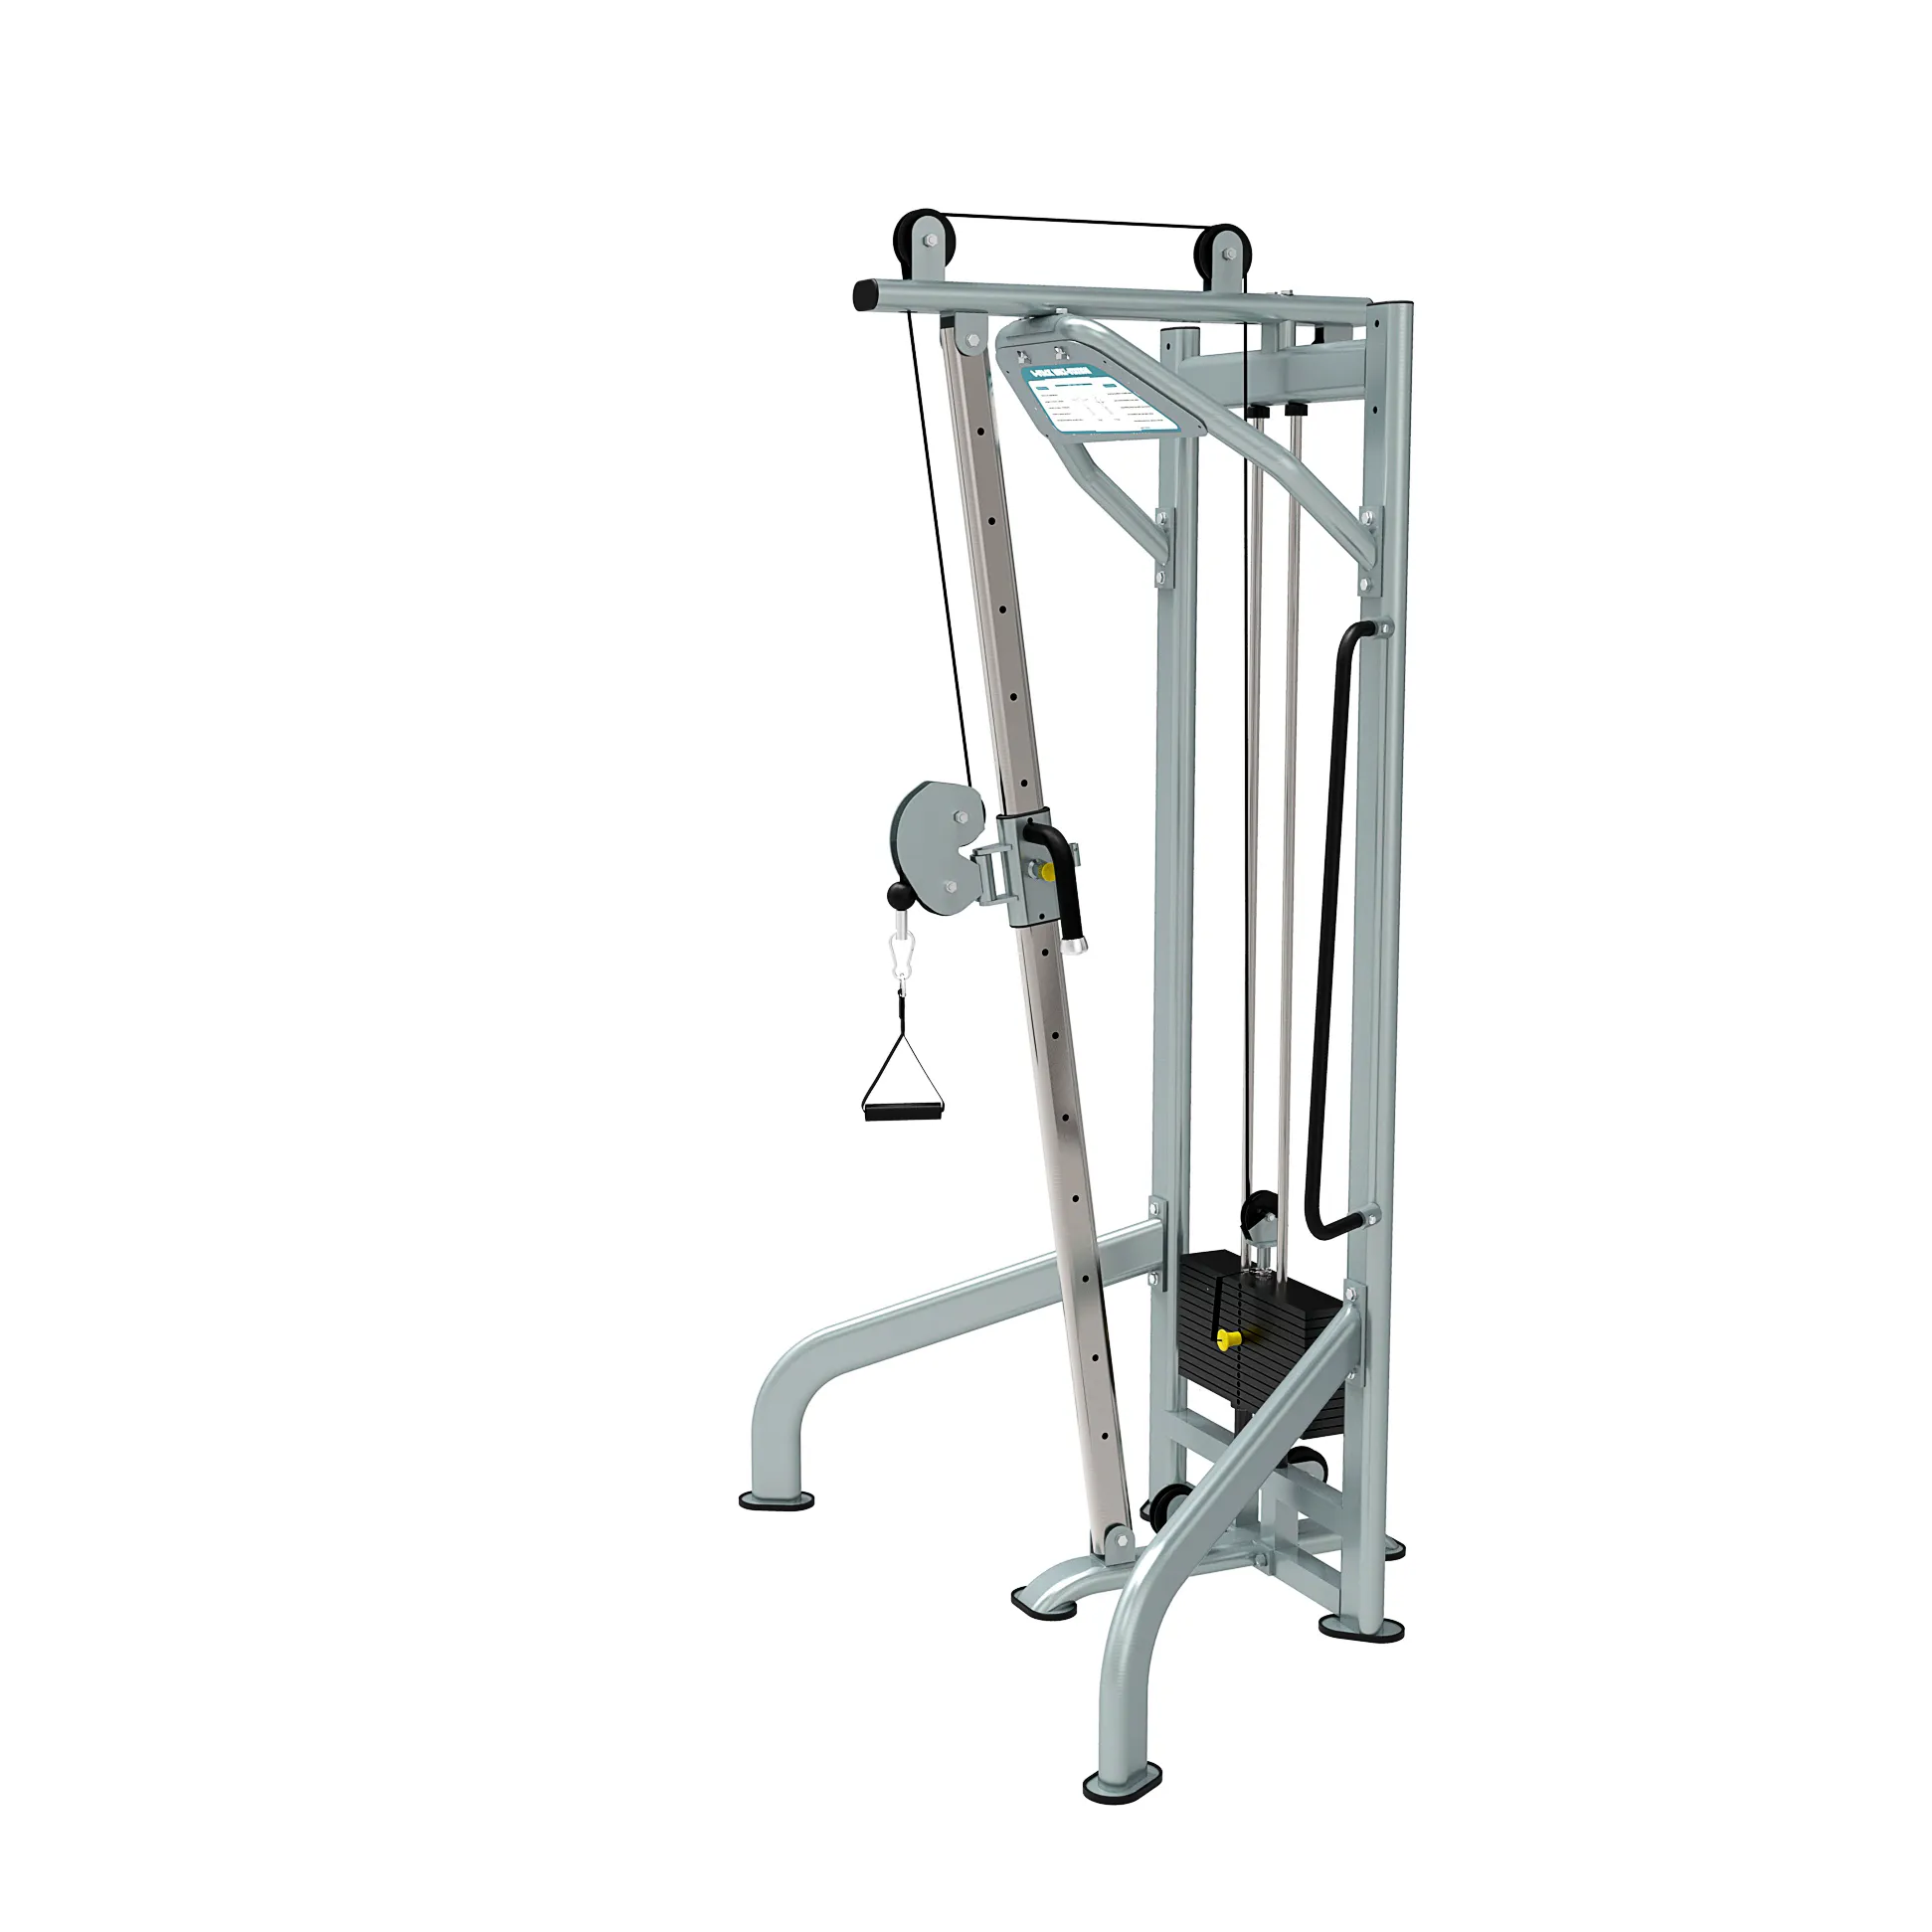 KJ-1230 Adjustable Low+High Pulley New Commercial Gym Equipment Hot Sale Fitness Equipment